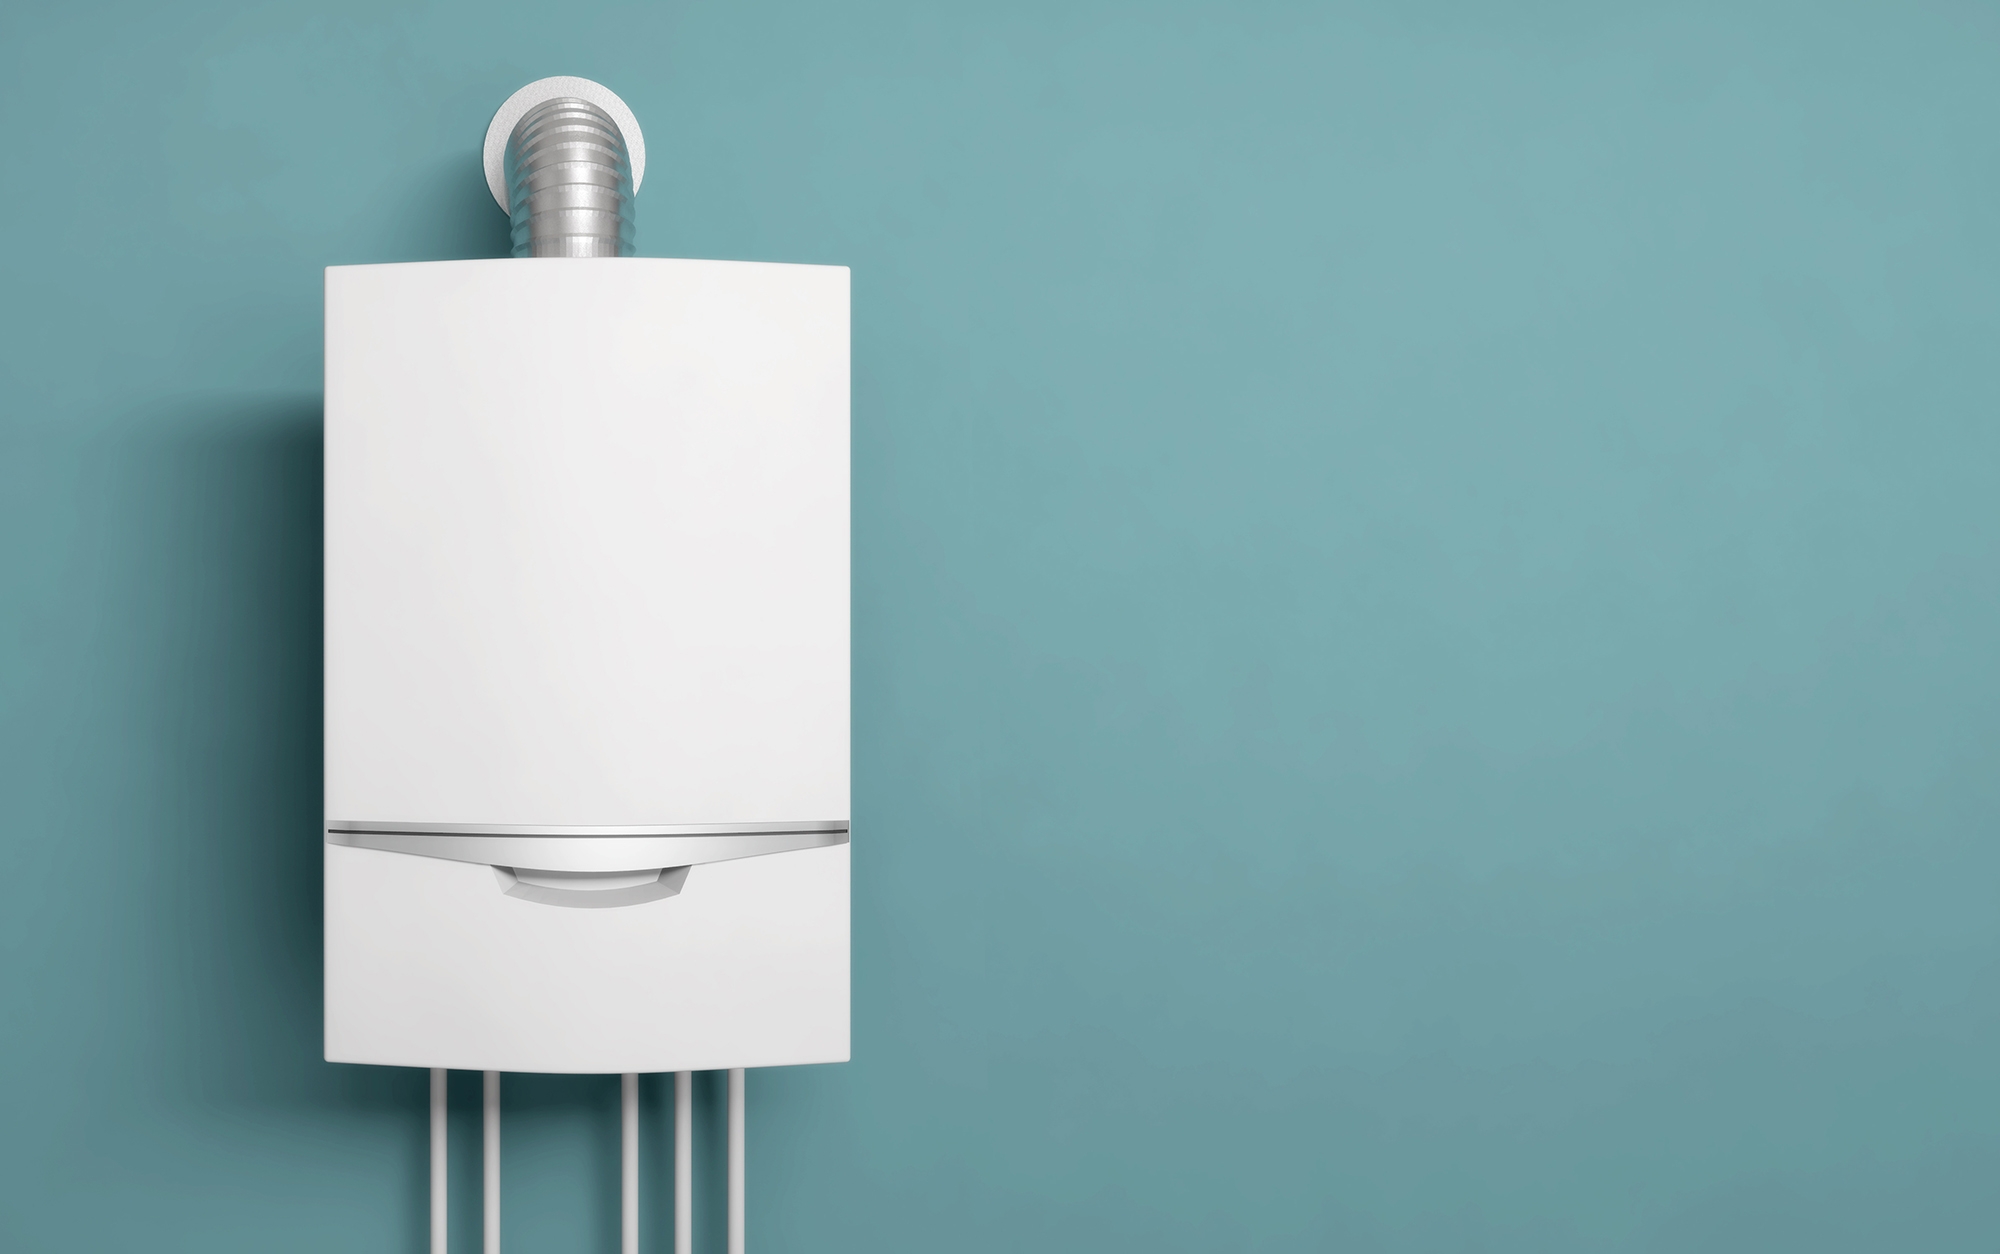 These gas boilers are popular choice for hot water and heating in UK homes